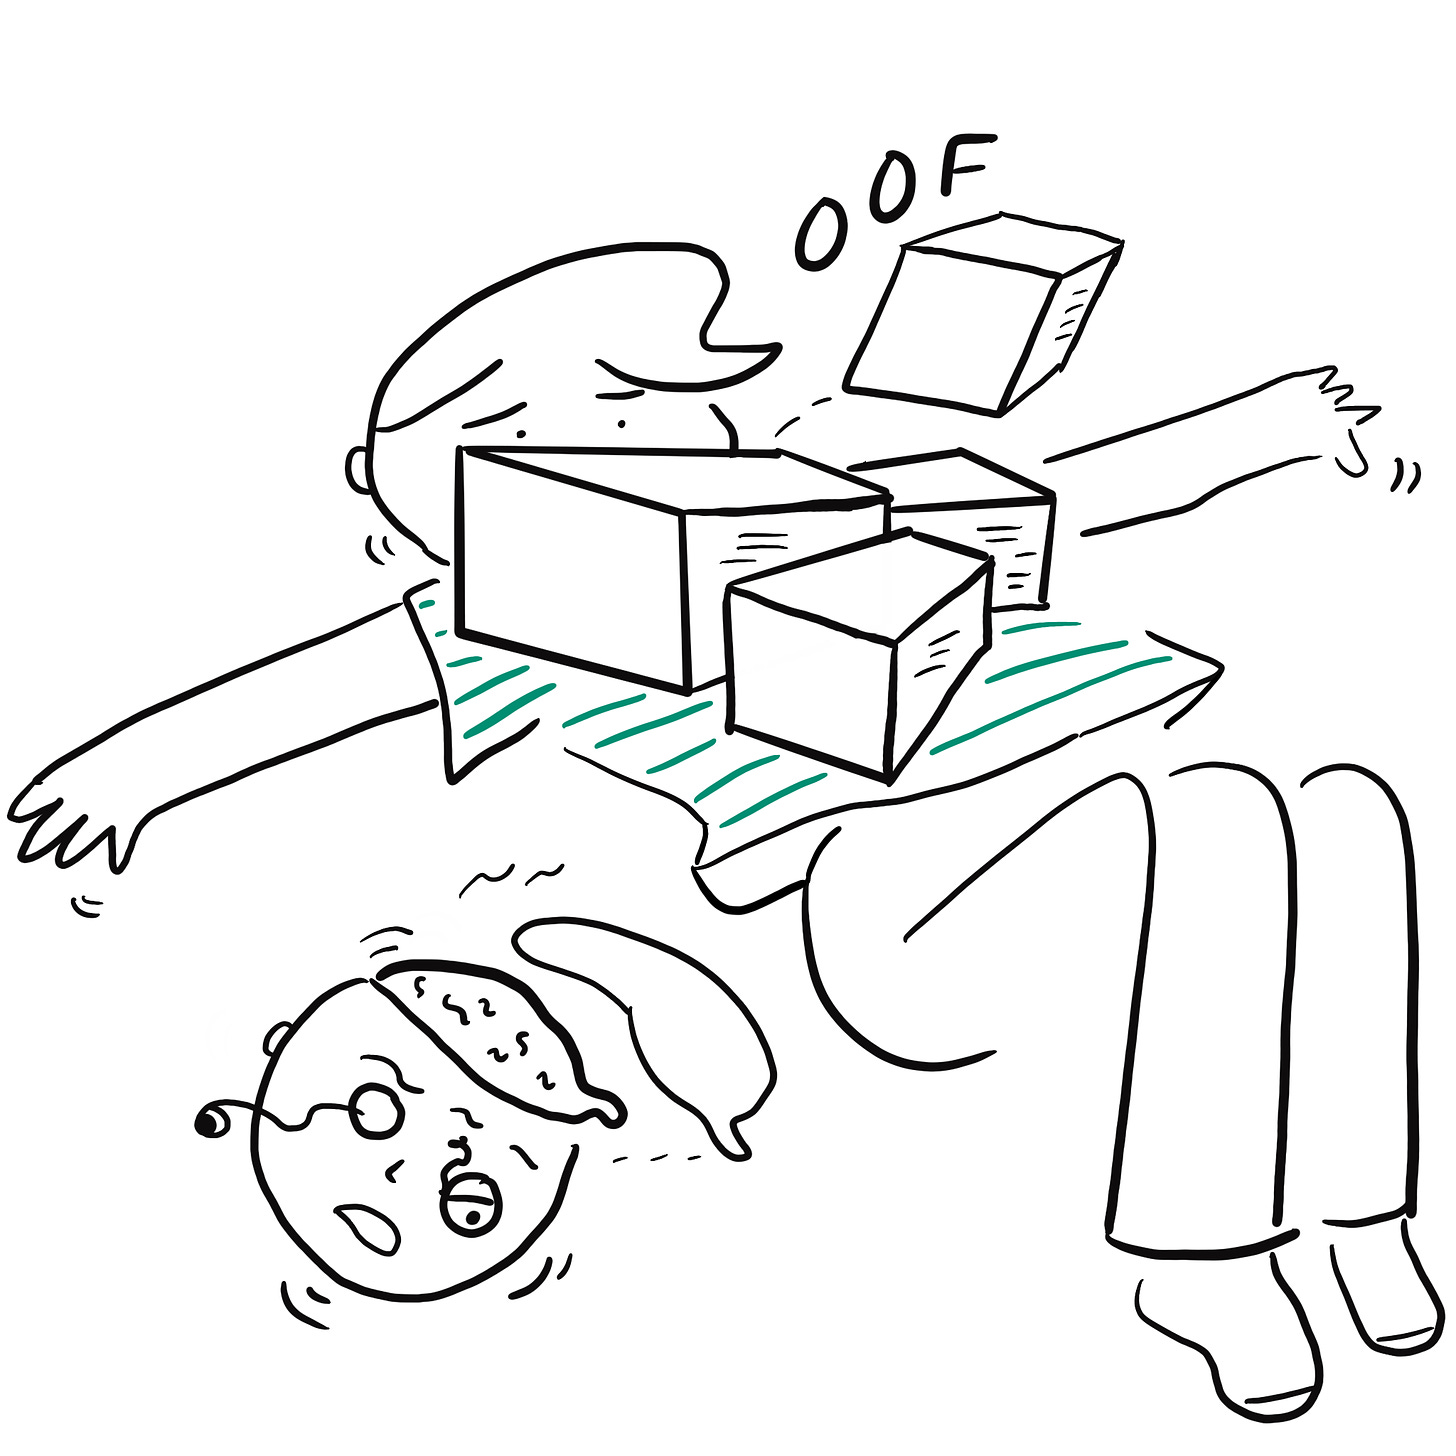 Cartoonist under a pile of boxes saying oof, head exploding with eyeball spronging out